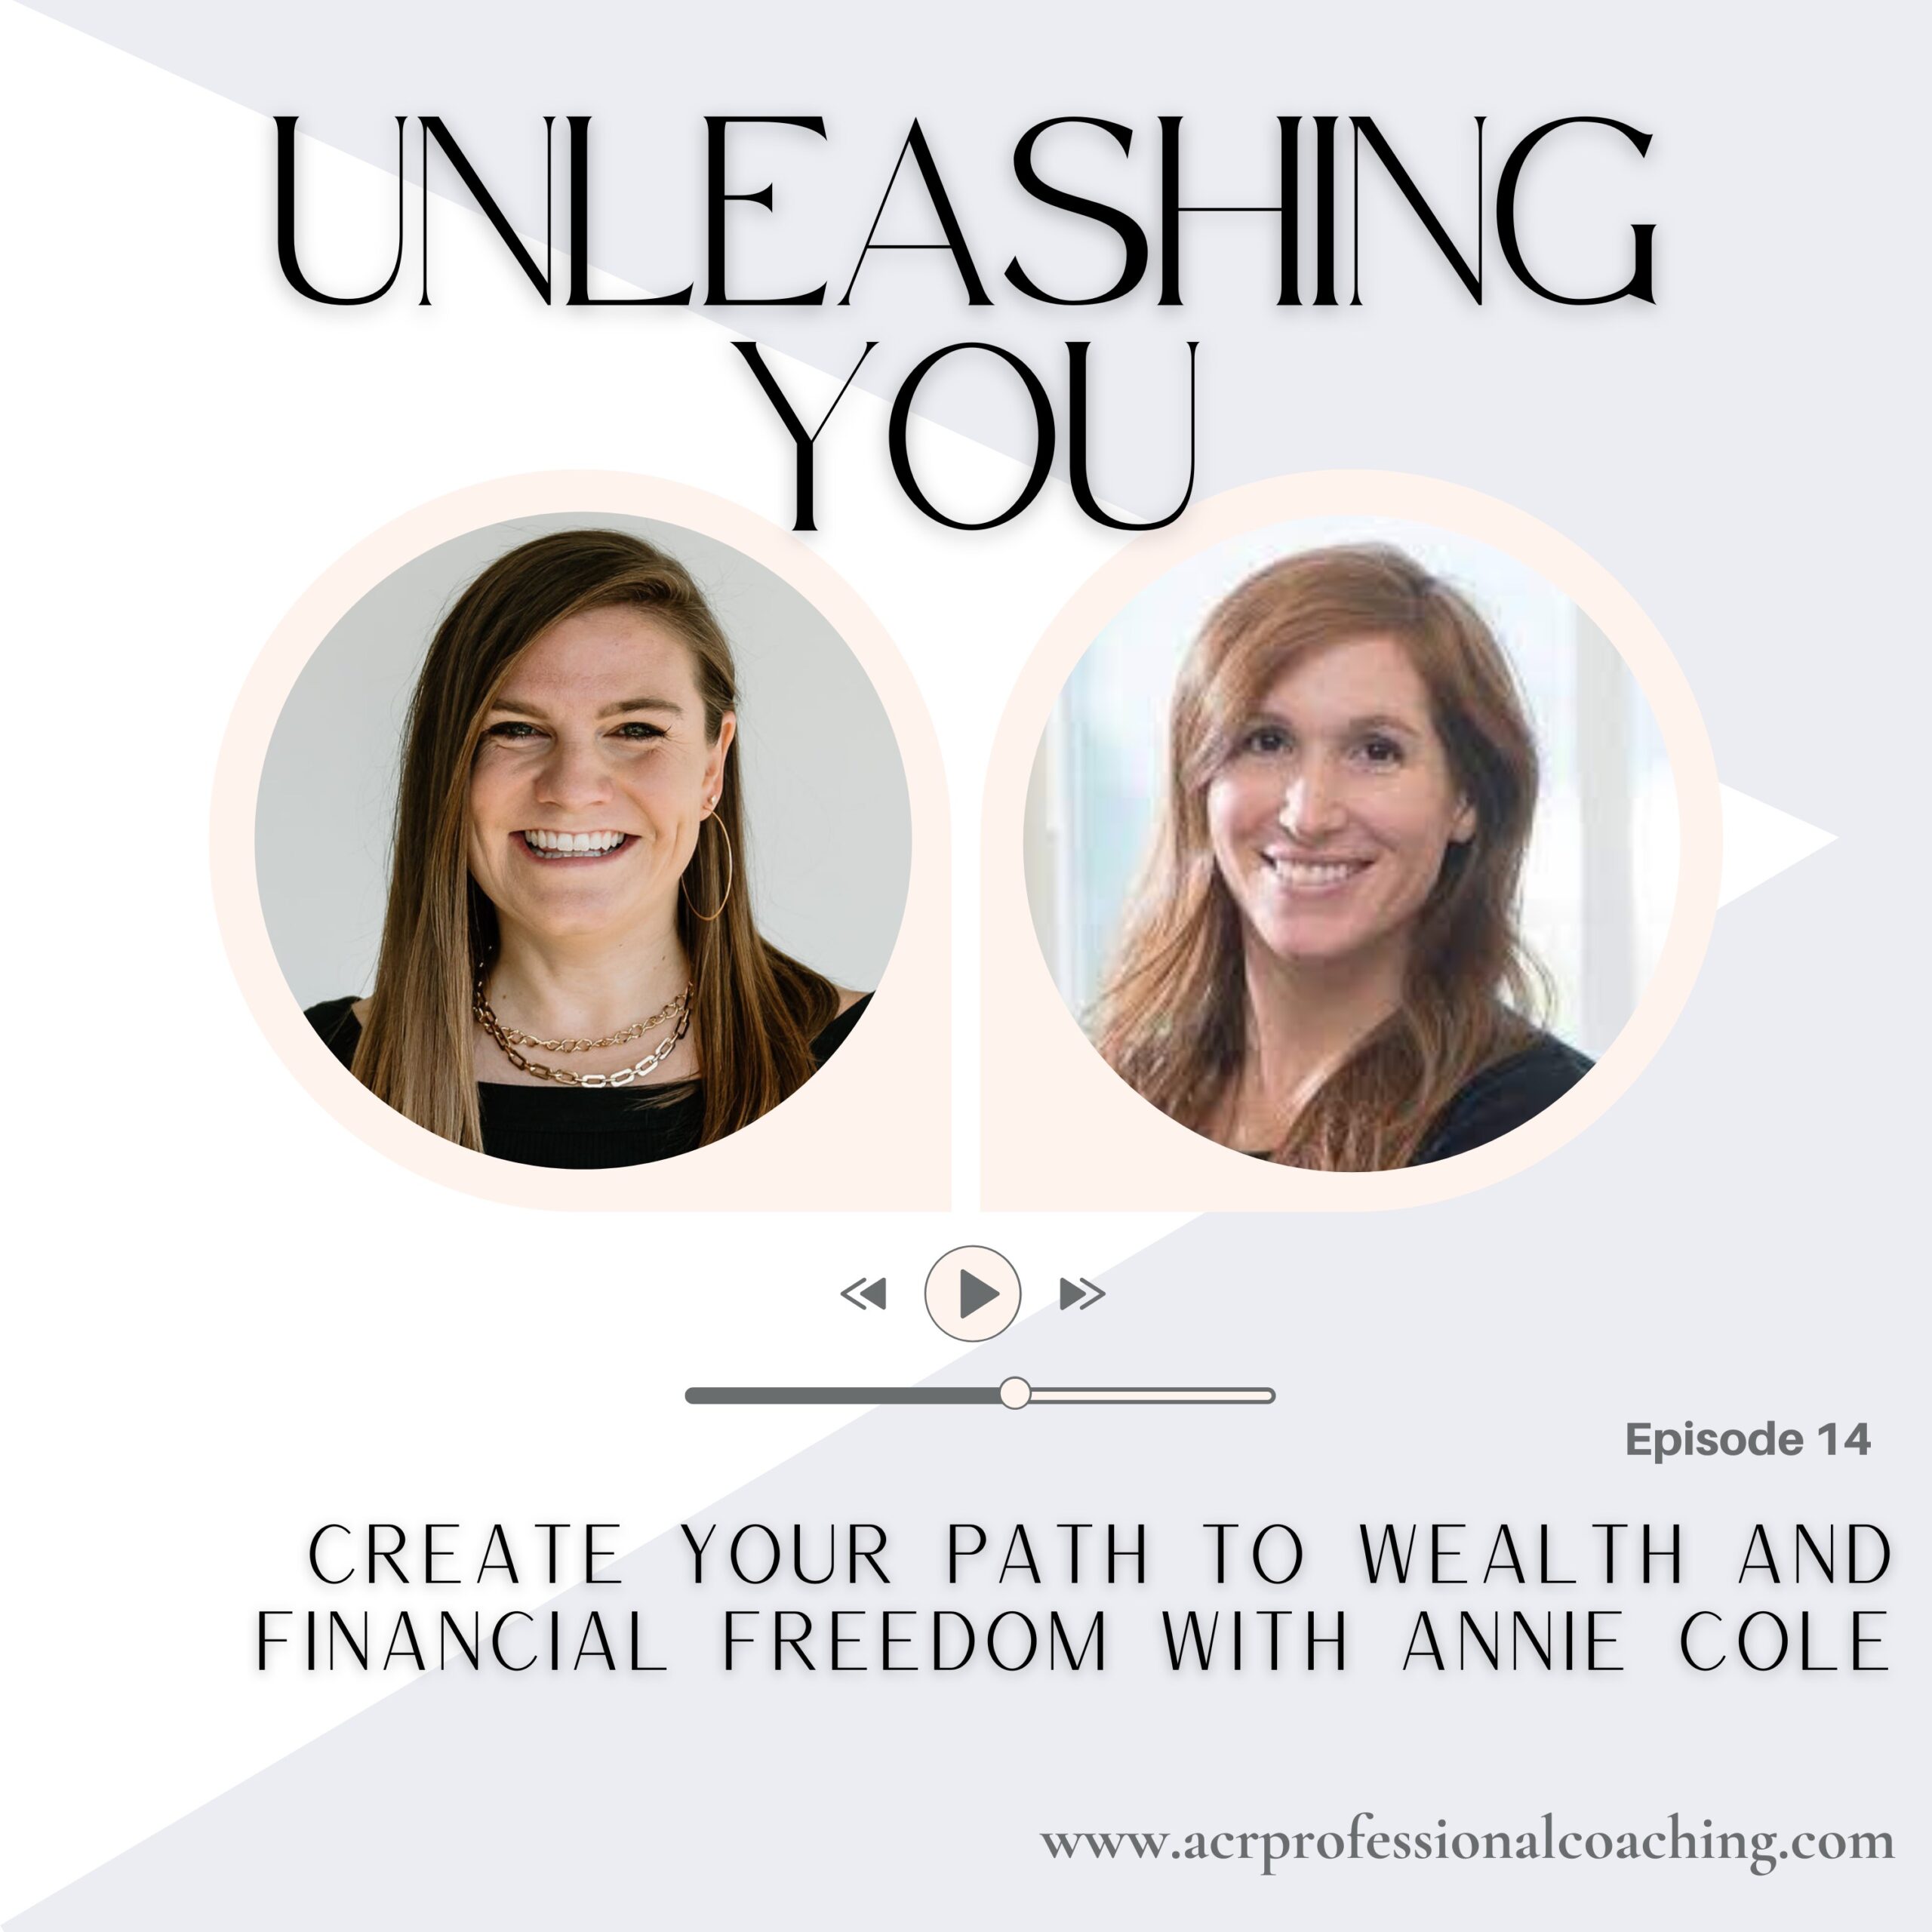 Create Your Path to Wealth and Financial Freedom with Annie Cole